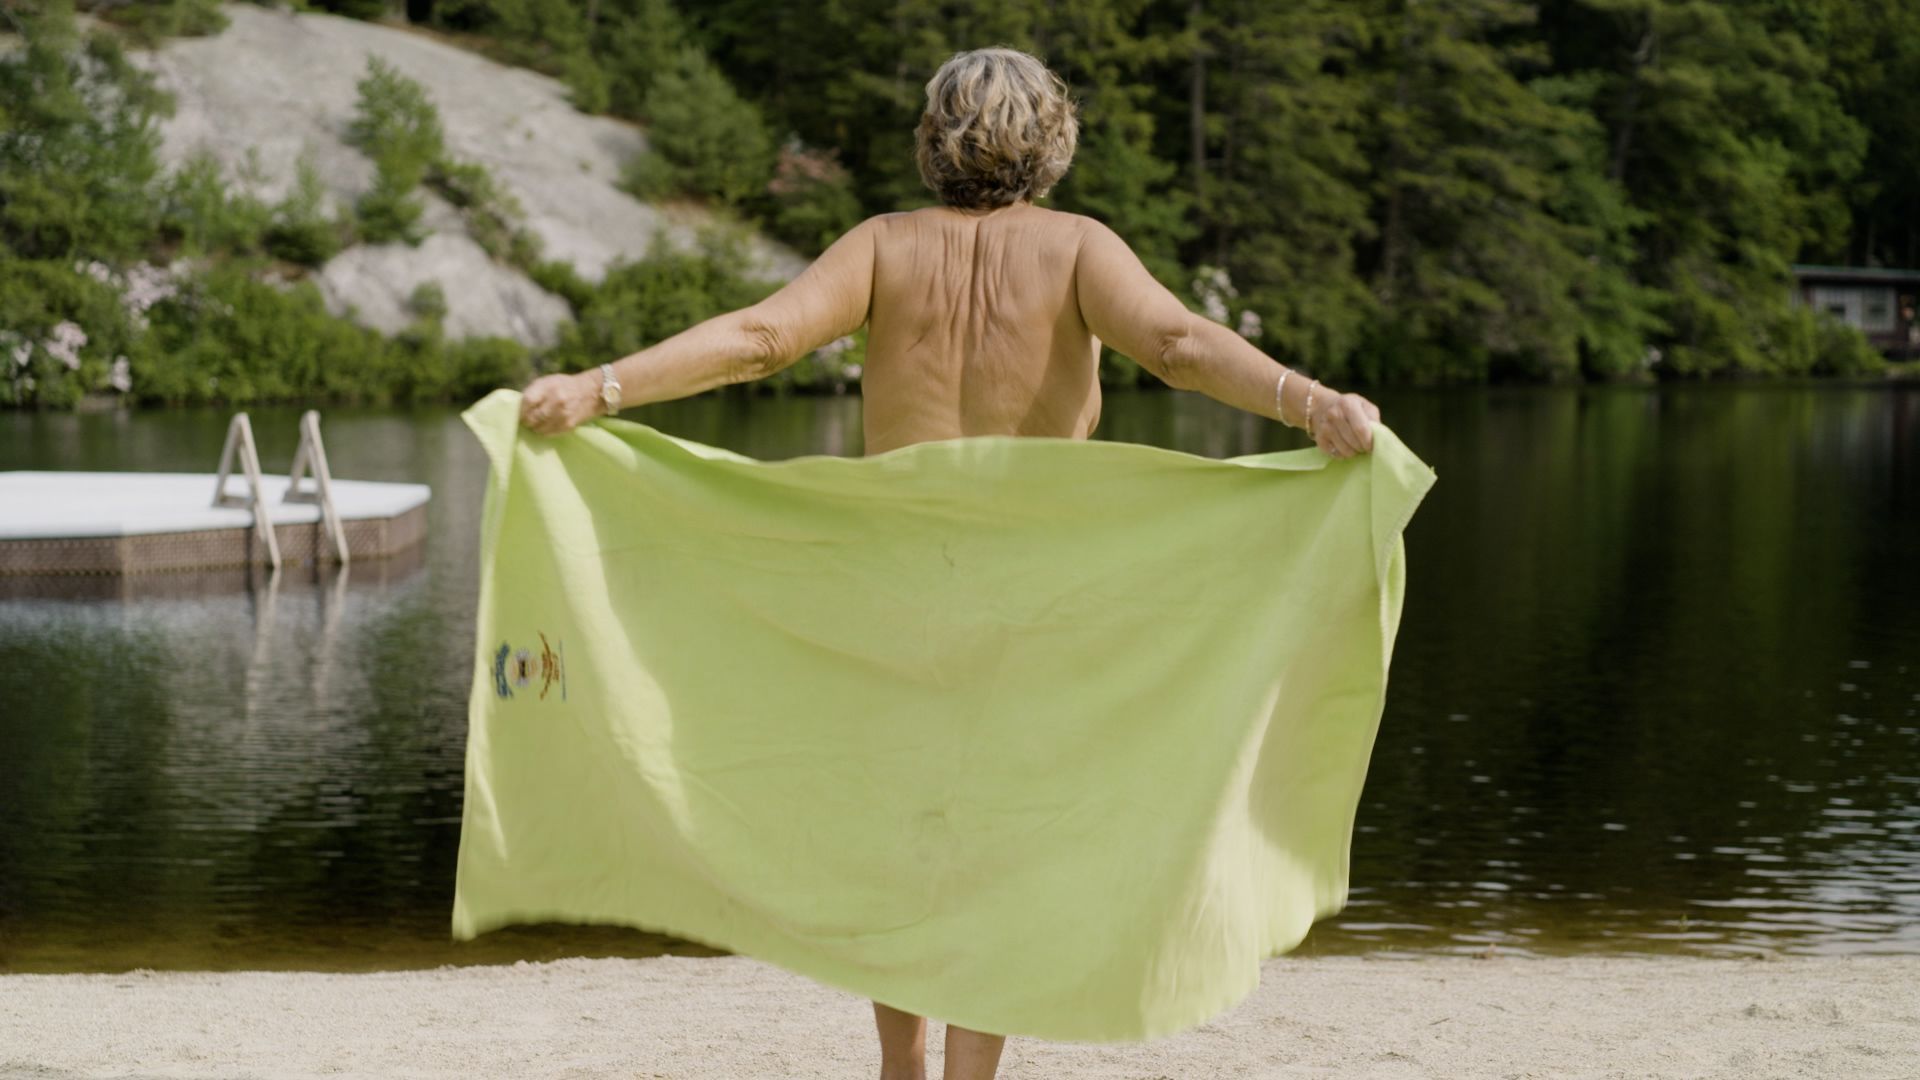 Nudist Fisting - Nudist explains what you should definitely not do at a nude beach - CNN  Video